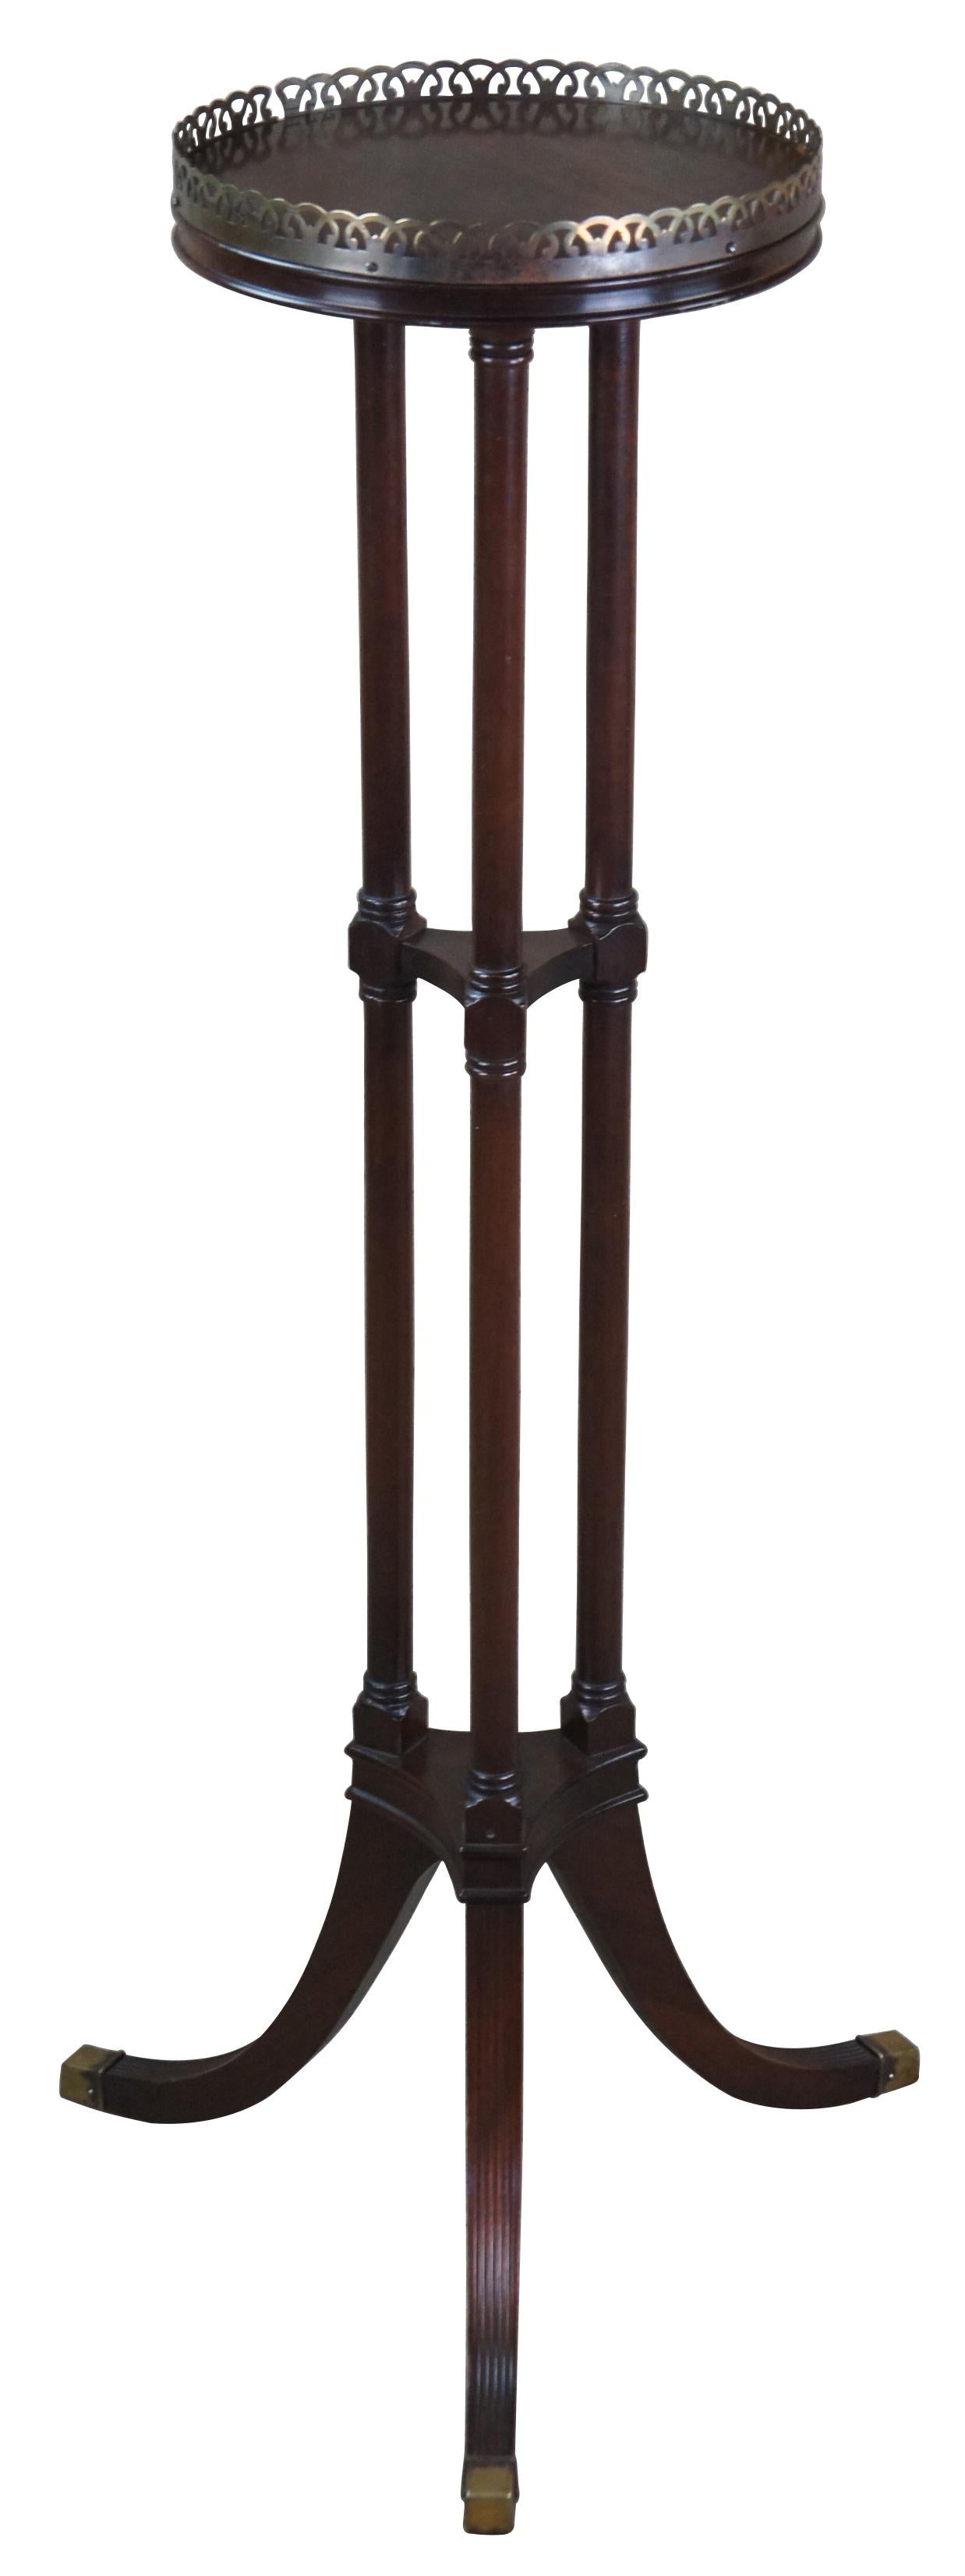 Neoclassical Revival Ferguson Bros Mahogany Fluted Tri Column Brass Gallery Pedestal Plant Stand